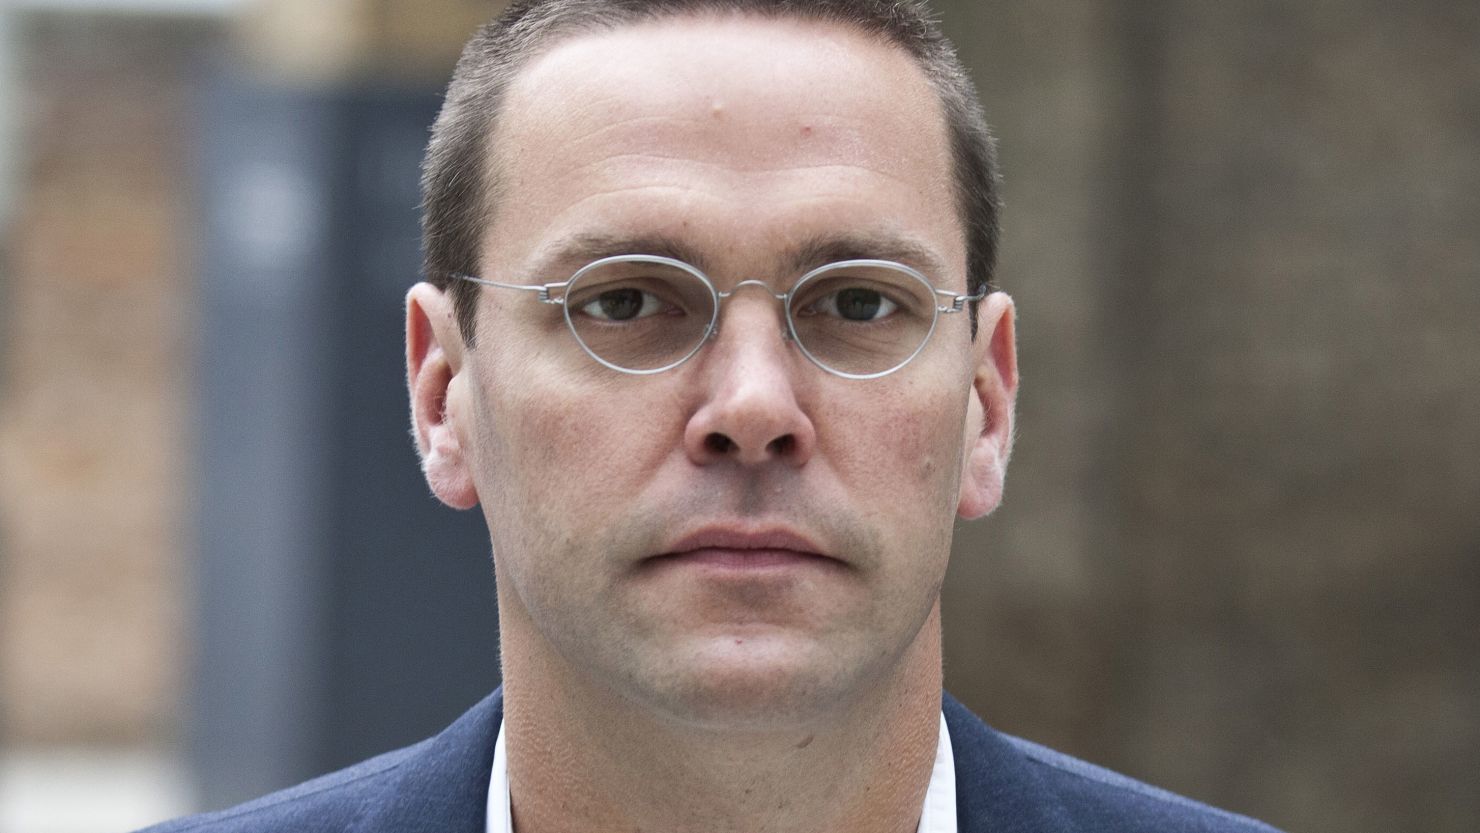 Email correspondence show James Murdoch was warned of a threat to sue his News of the World newspaper over phone hacking in 2008.